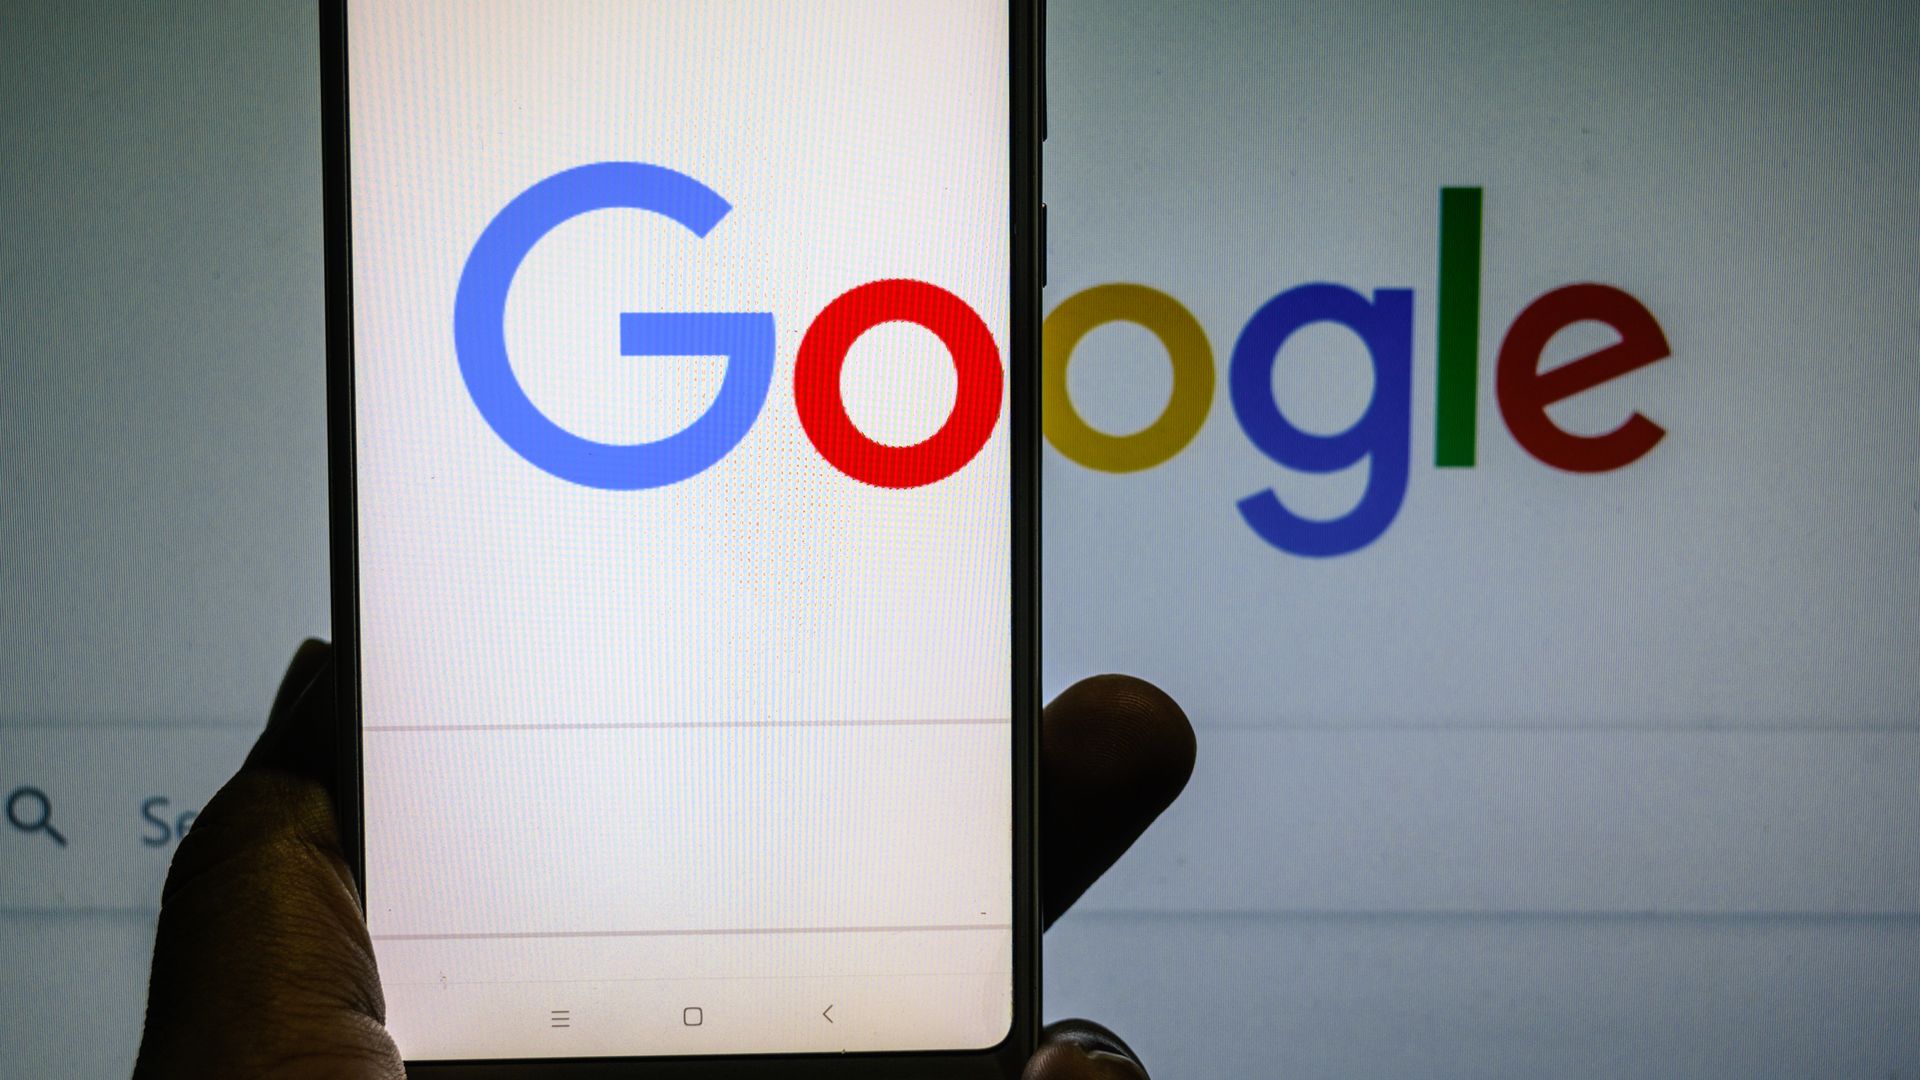 The Google logo appears on both a phone screen and a computer monitor.